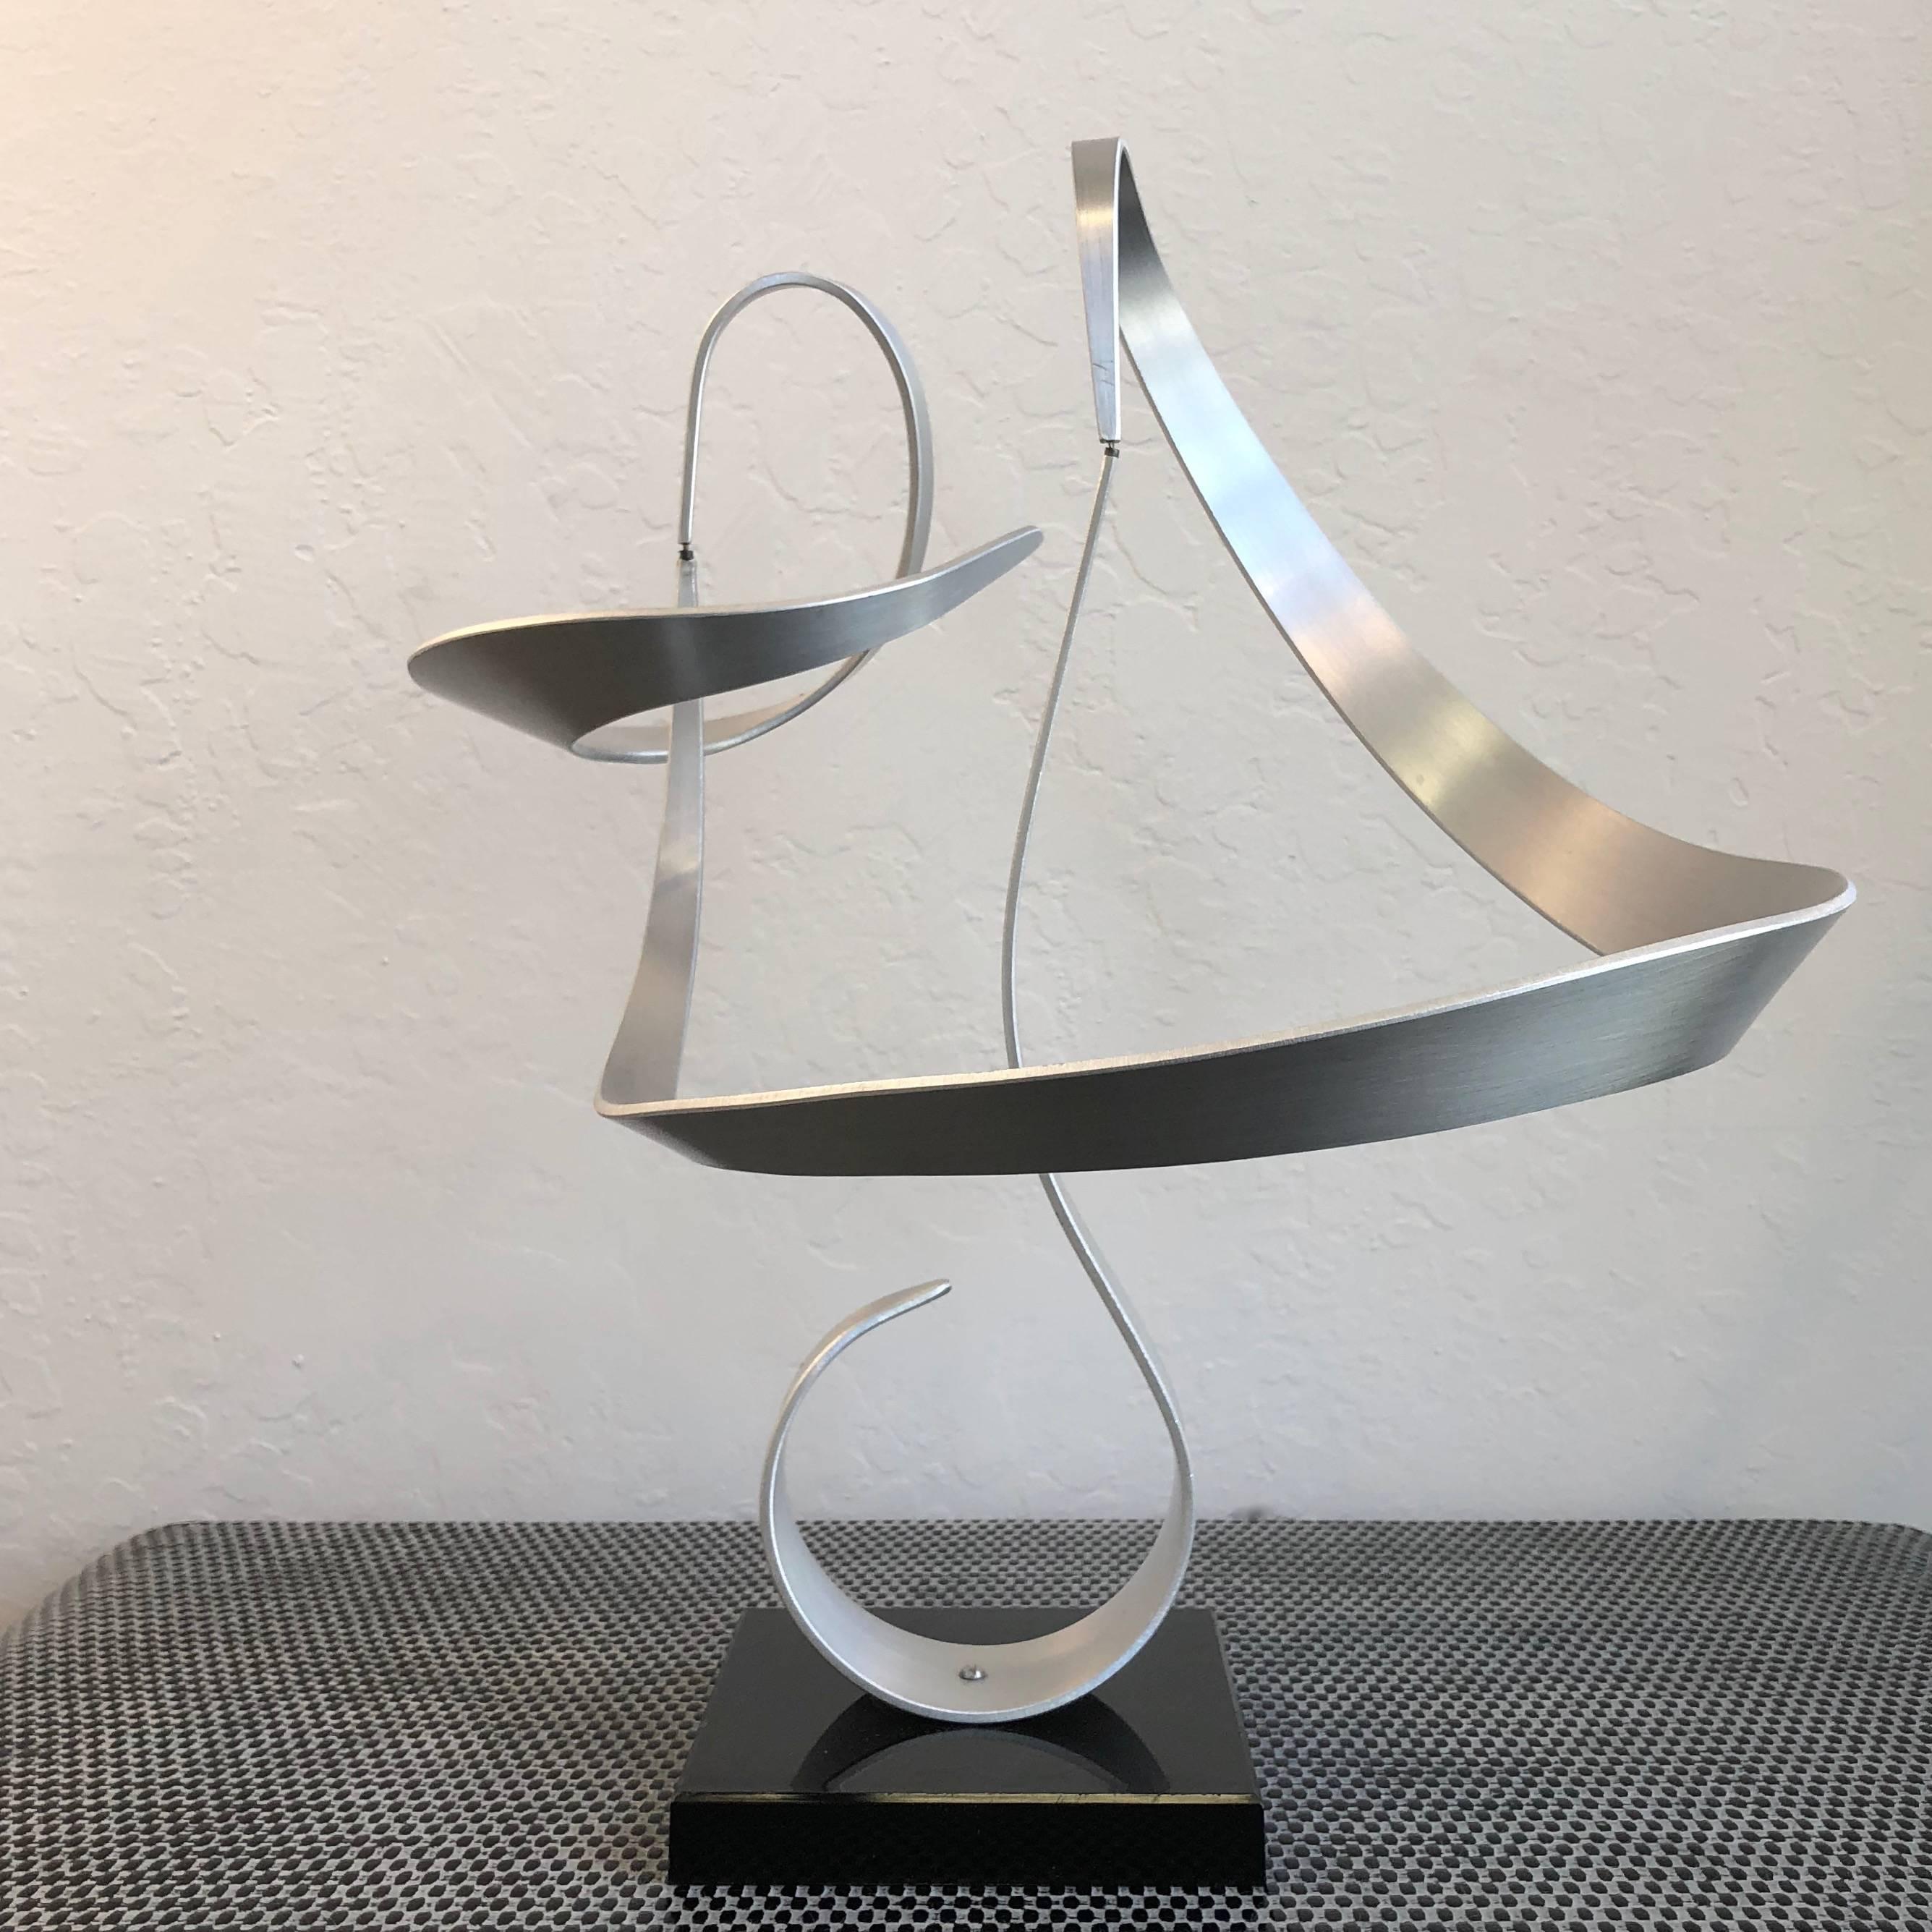 American John W. Anderson Abstract Kinetic Sculpture